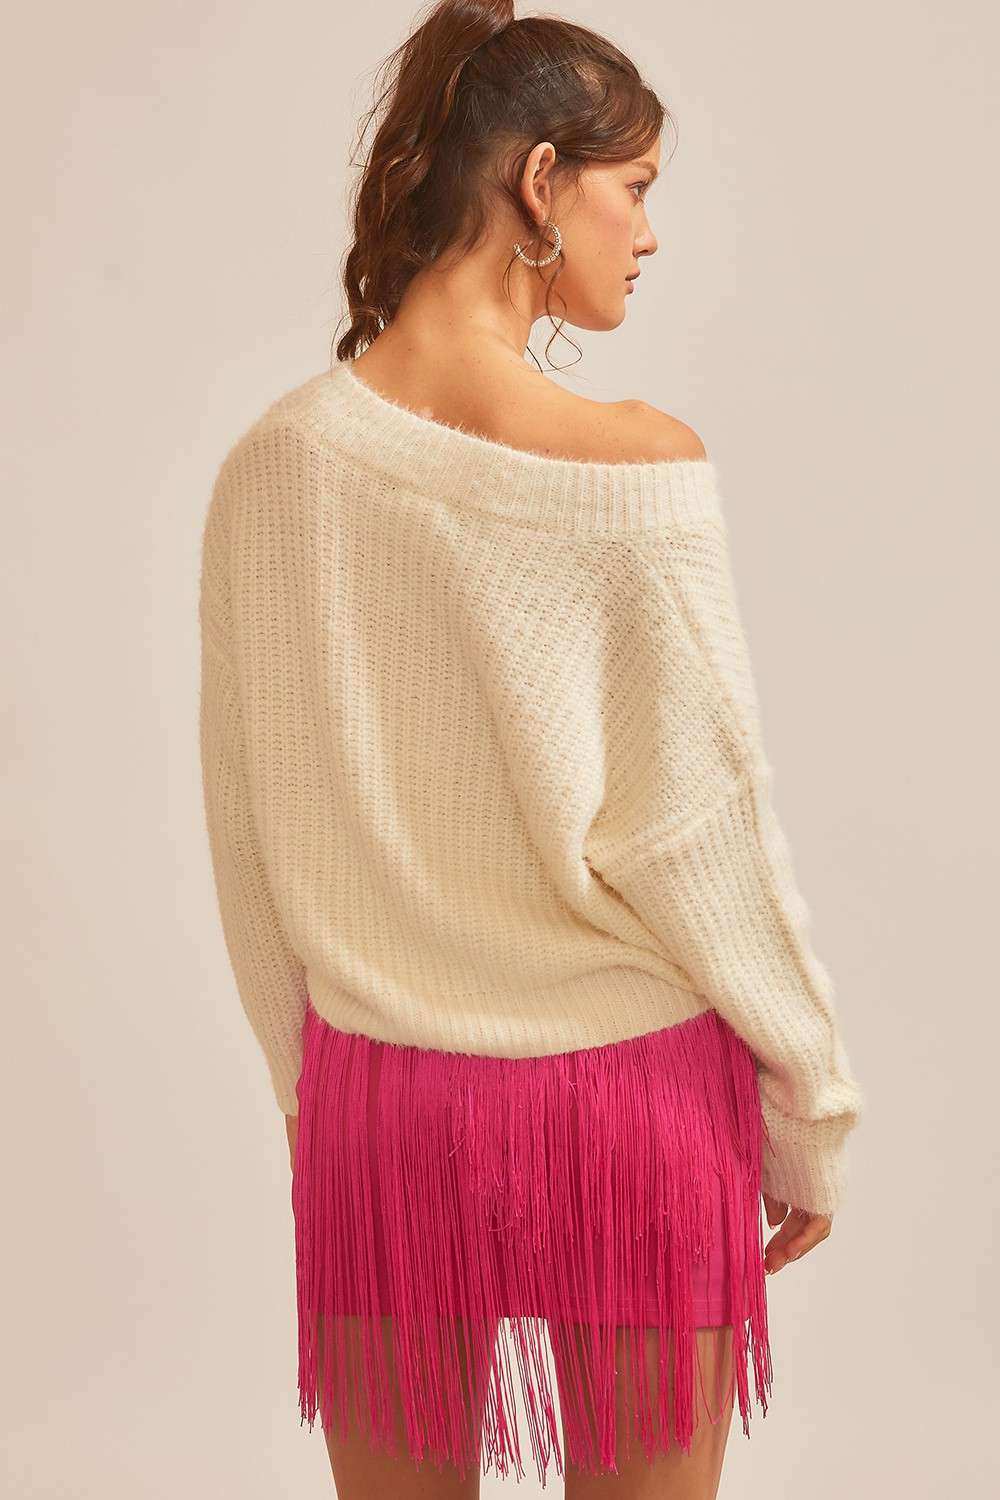 Discover the Perfect V-Neck Sweater: Soft, Sophisticated, and Ultimate Comfort - Cream